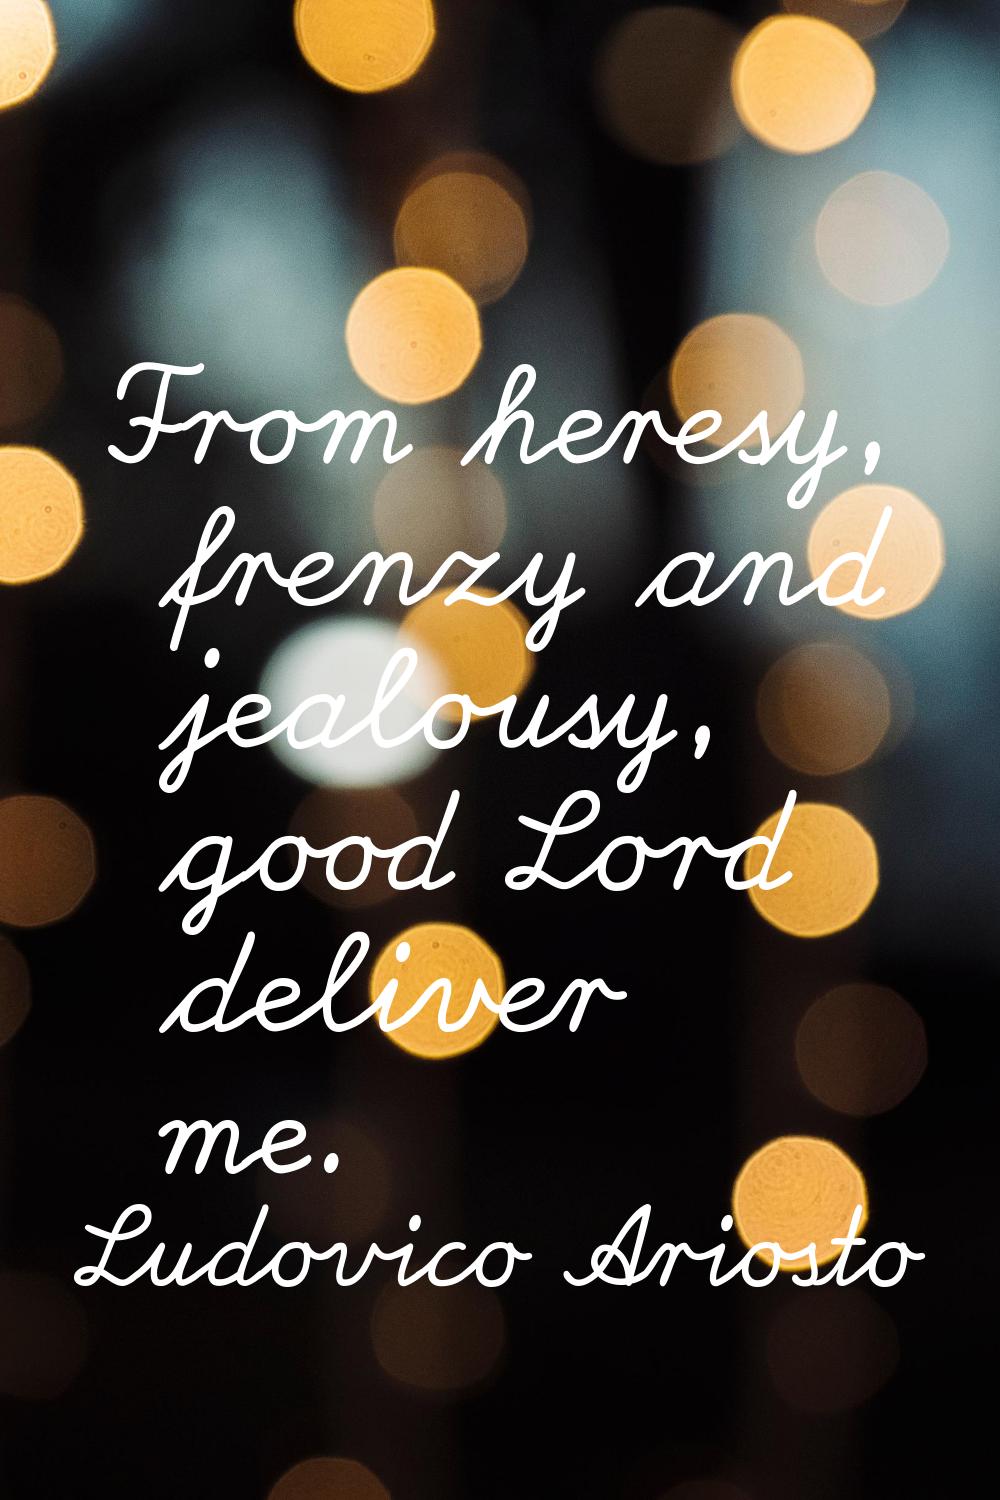 From heresy, frenzy and jealousy, good Lord deliver me.